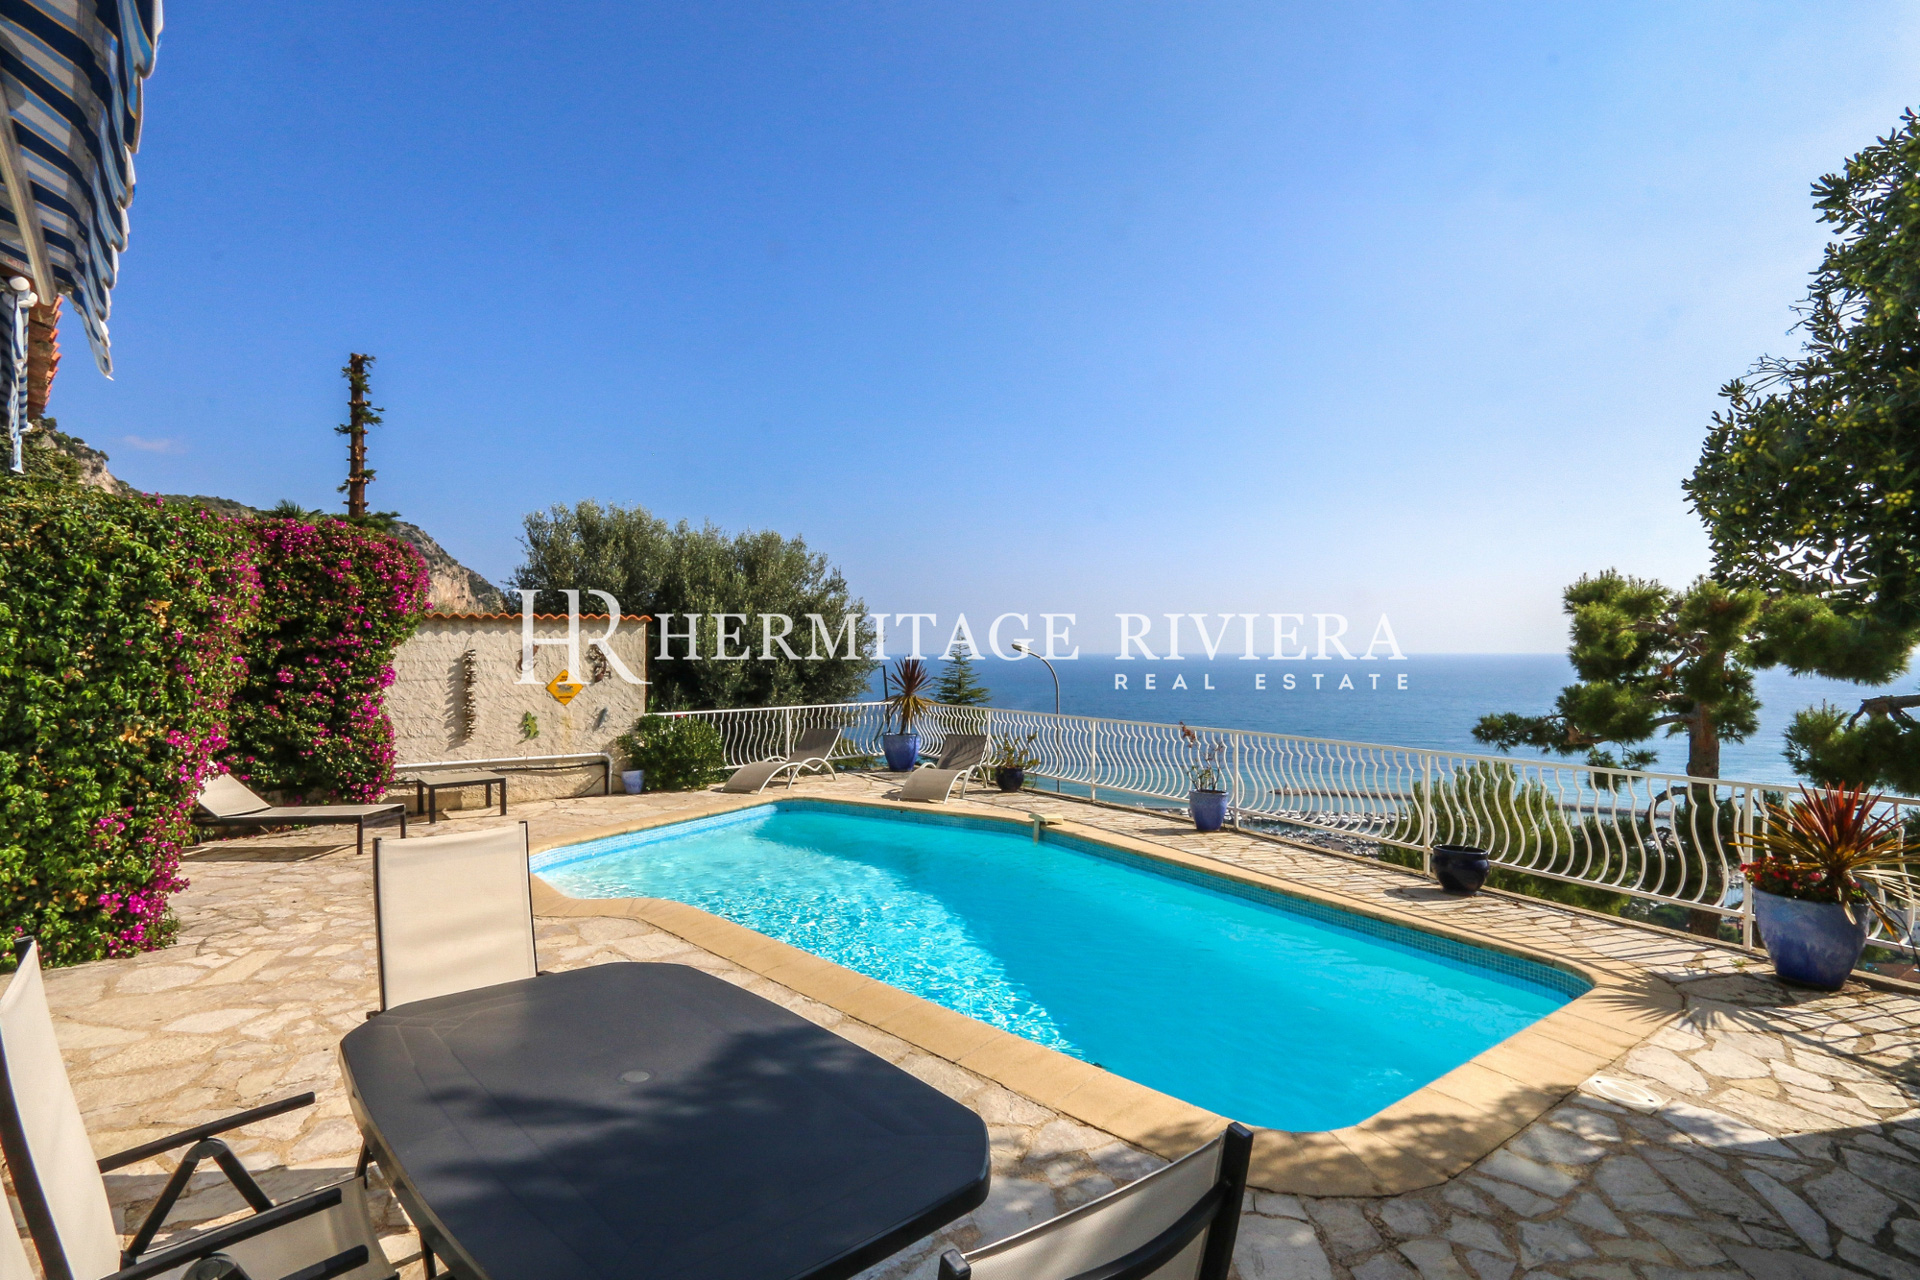 Villa with pool and exceptional views (image 1)